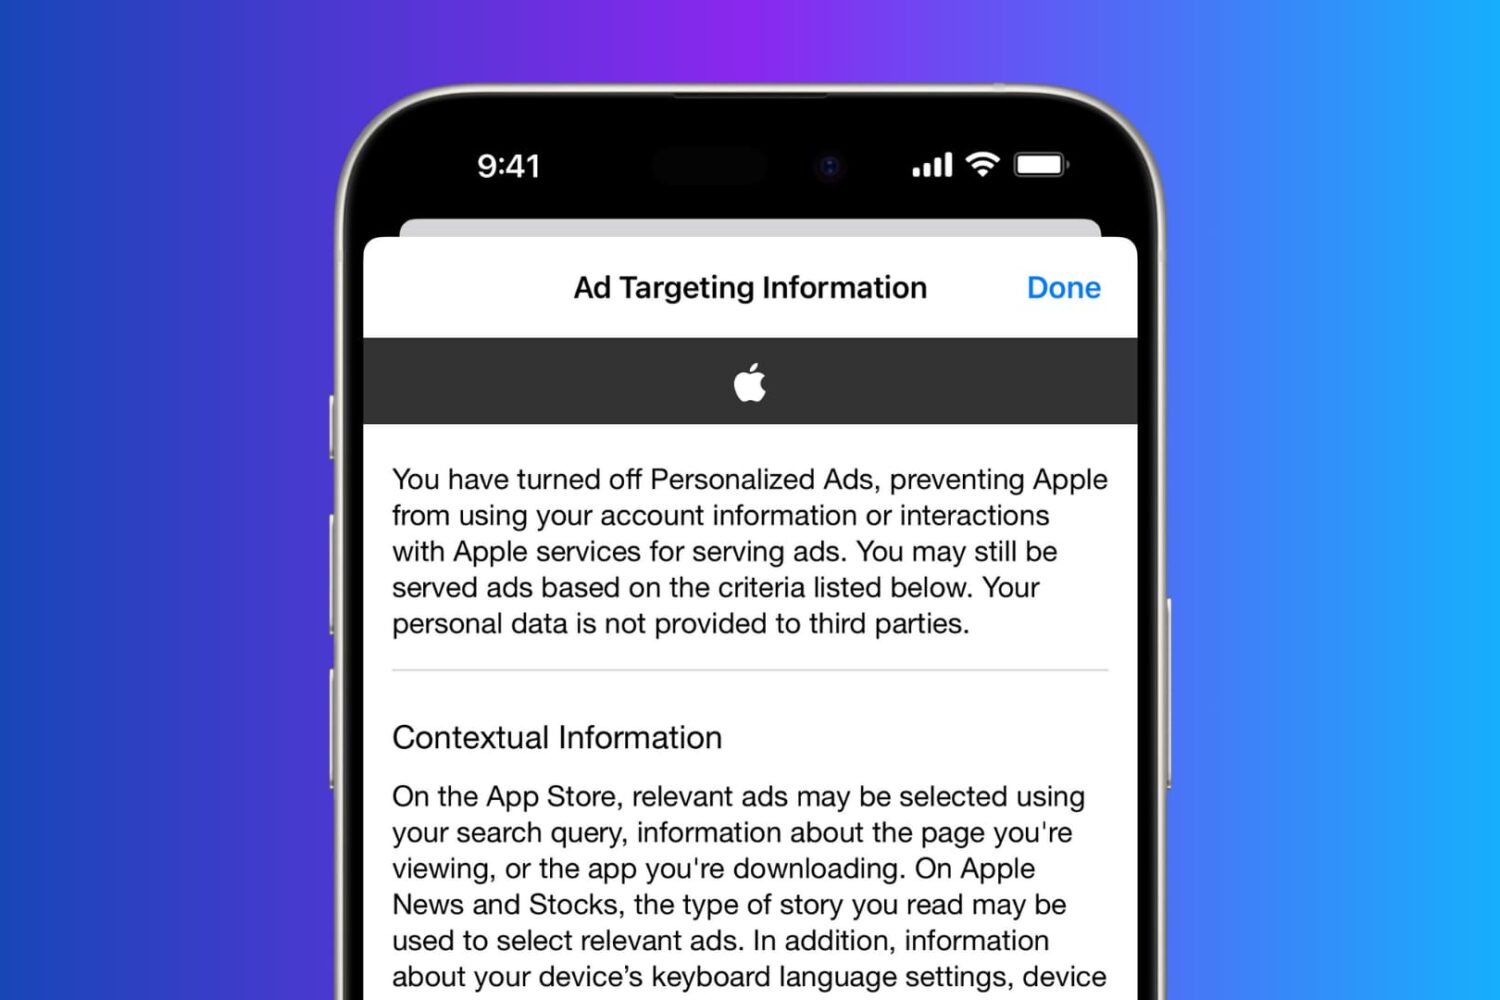 Apple Ad Targeting Information page on iPhone